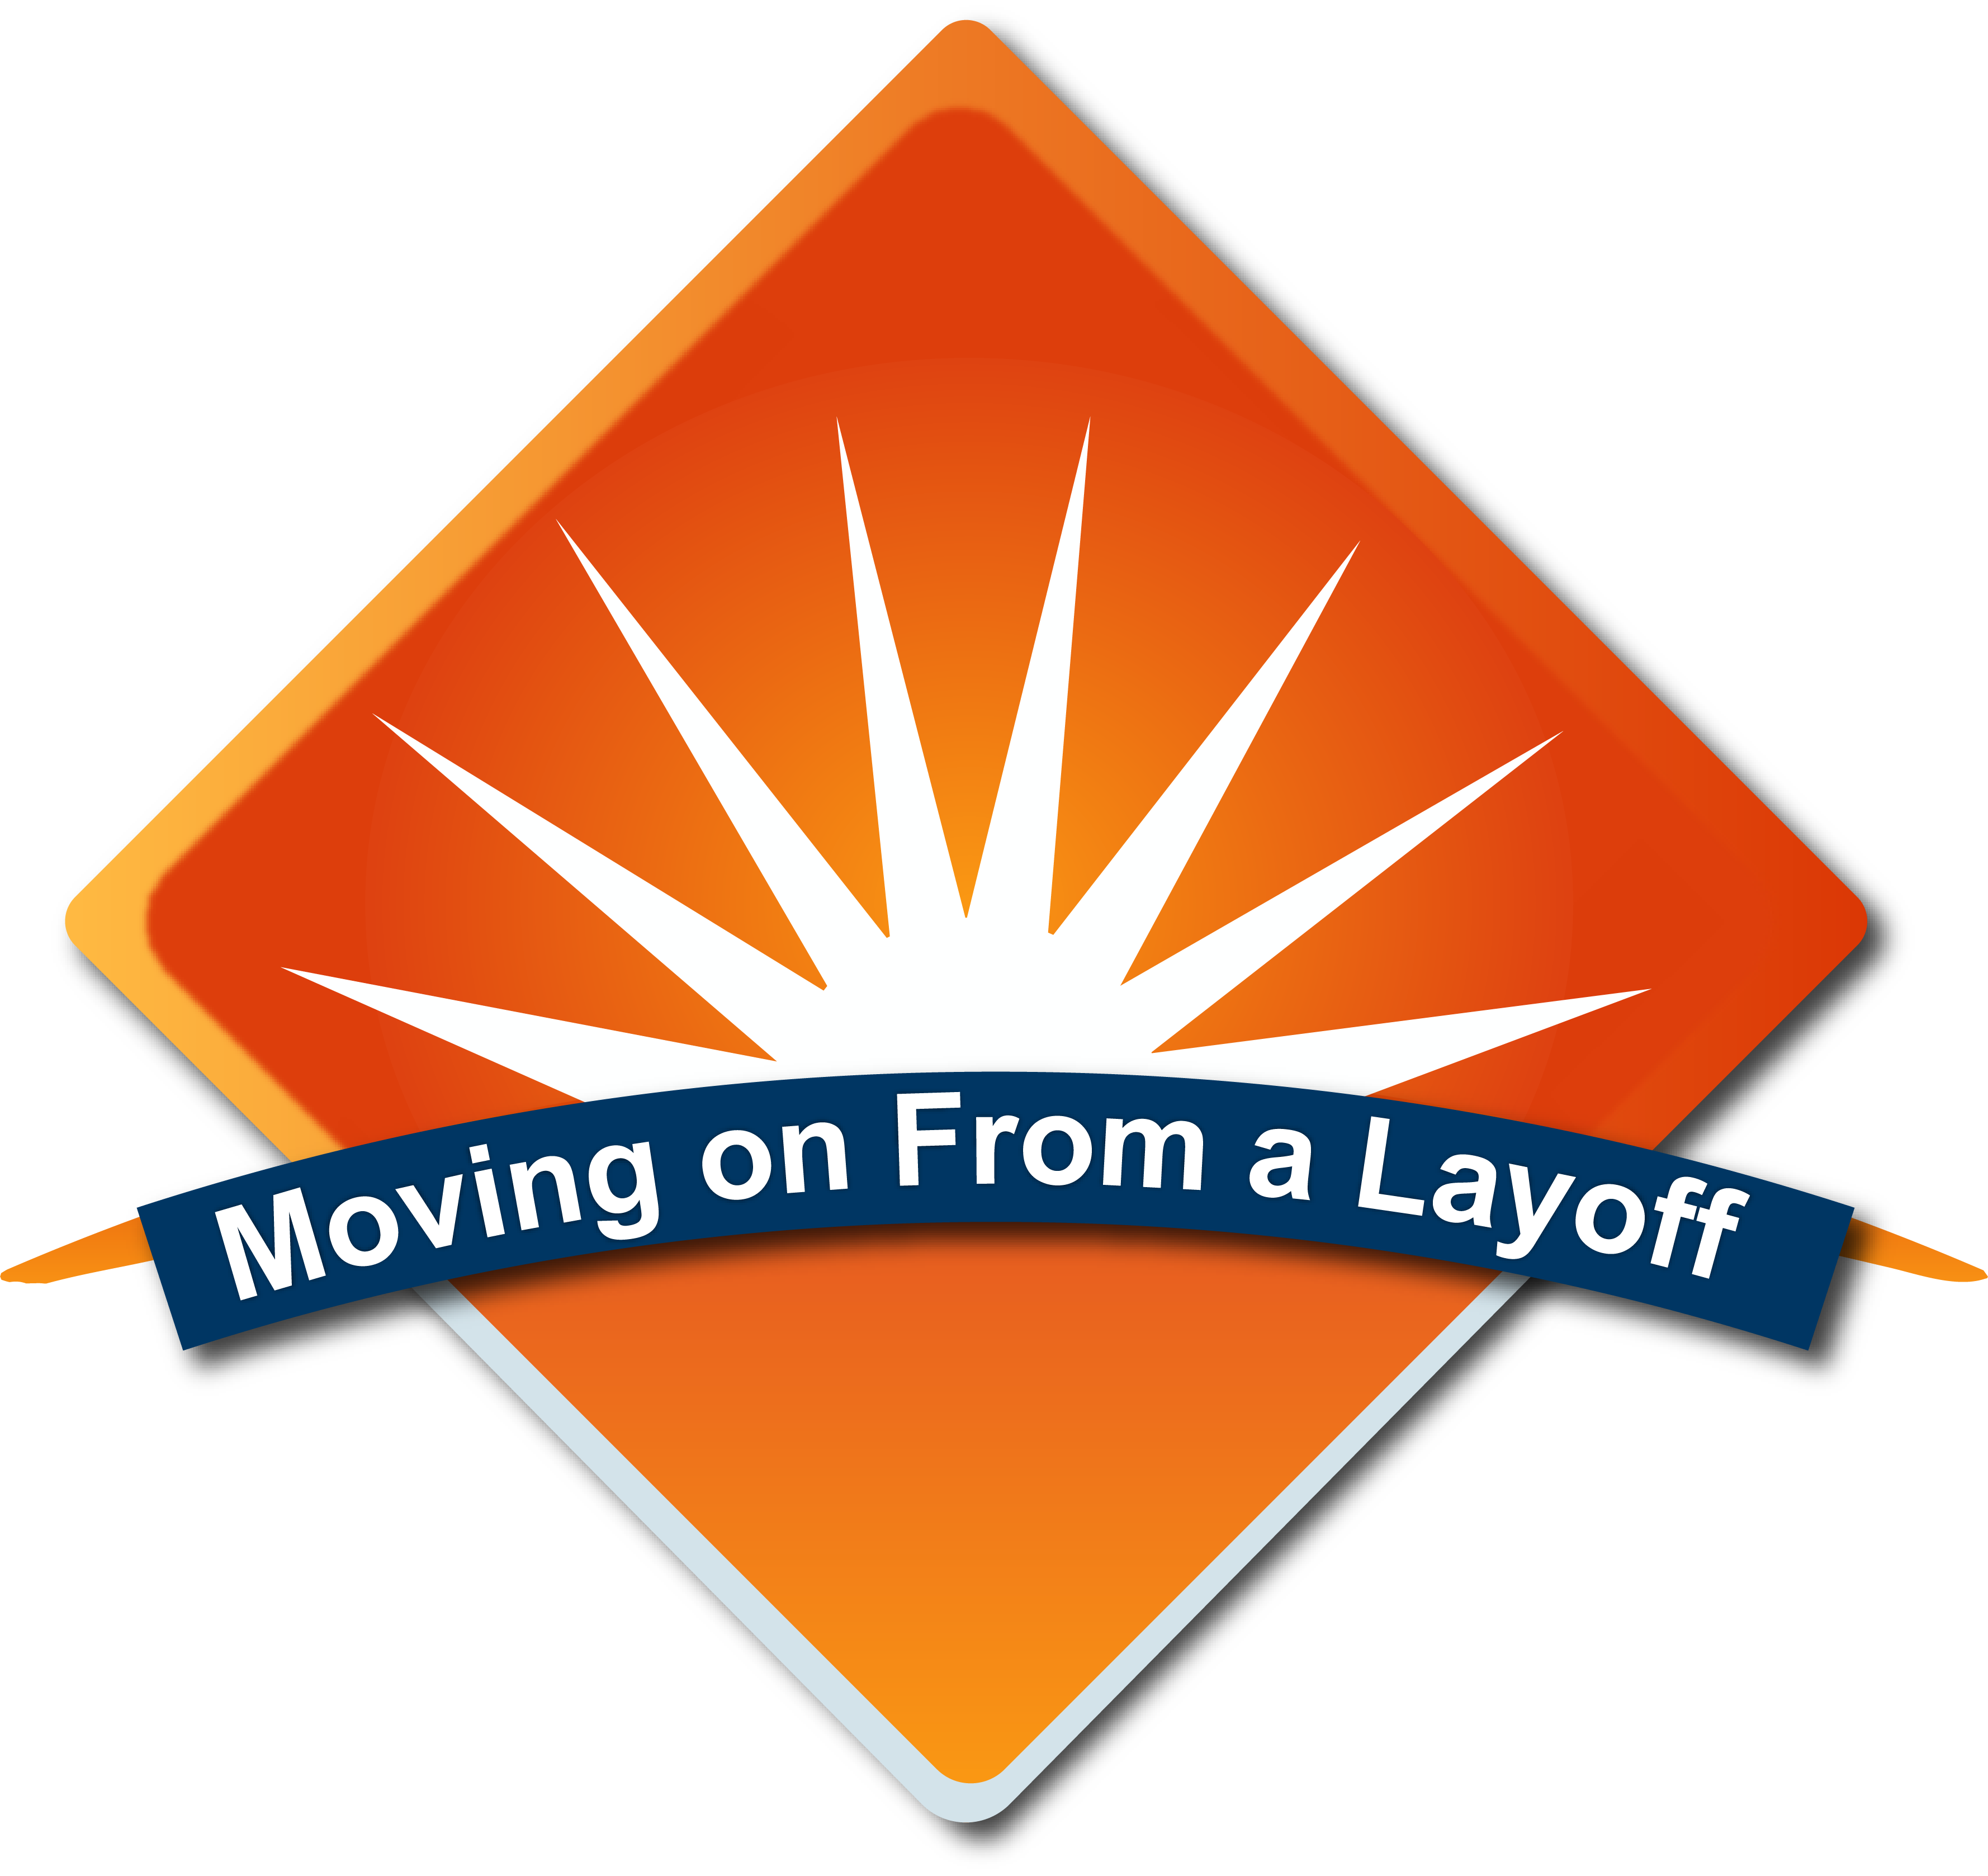 Job Loss Icon - Moving on from a Layoff